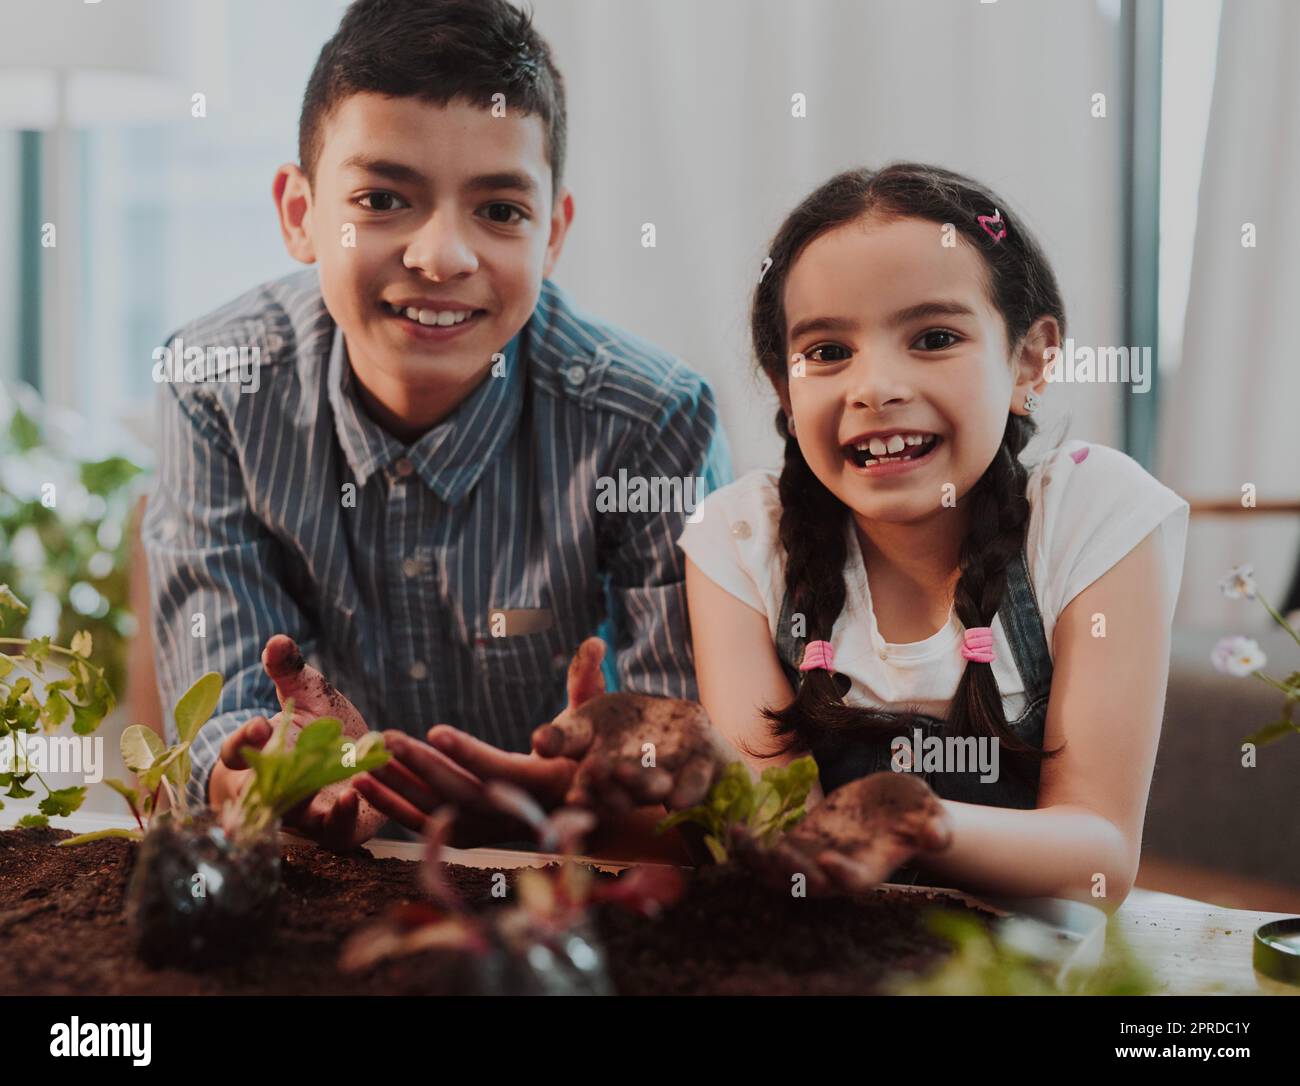 Things tend to get a little dirty over here. Cropped portrait of two adorable young siblings smiling while doing some gardening at home. Stock Photo